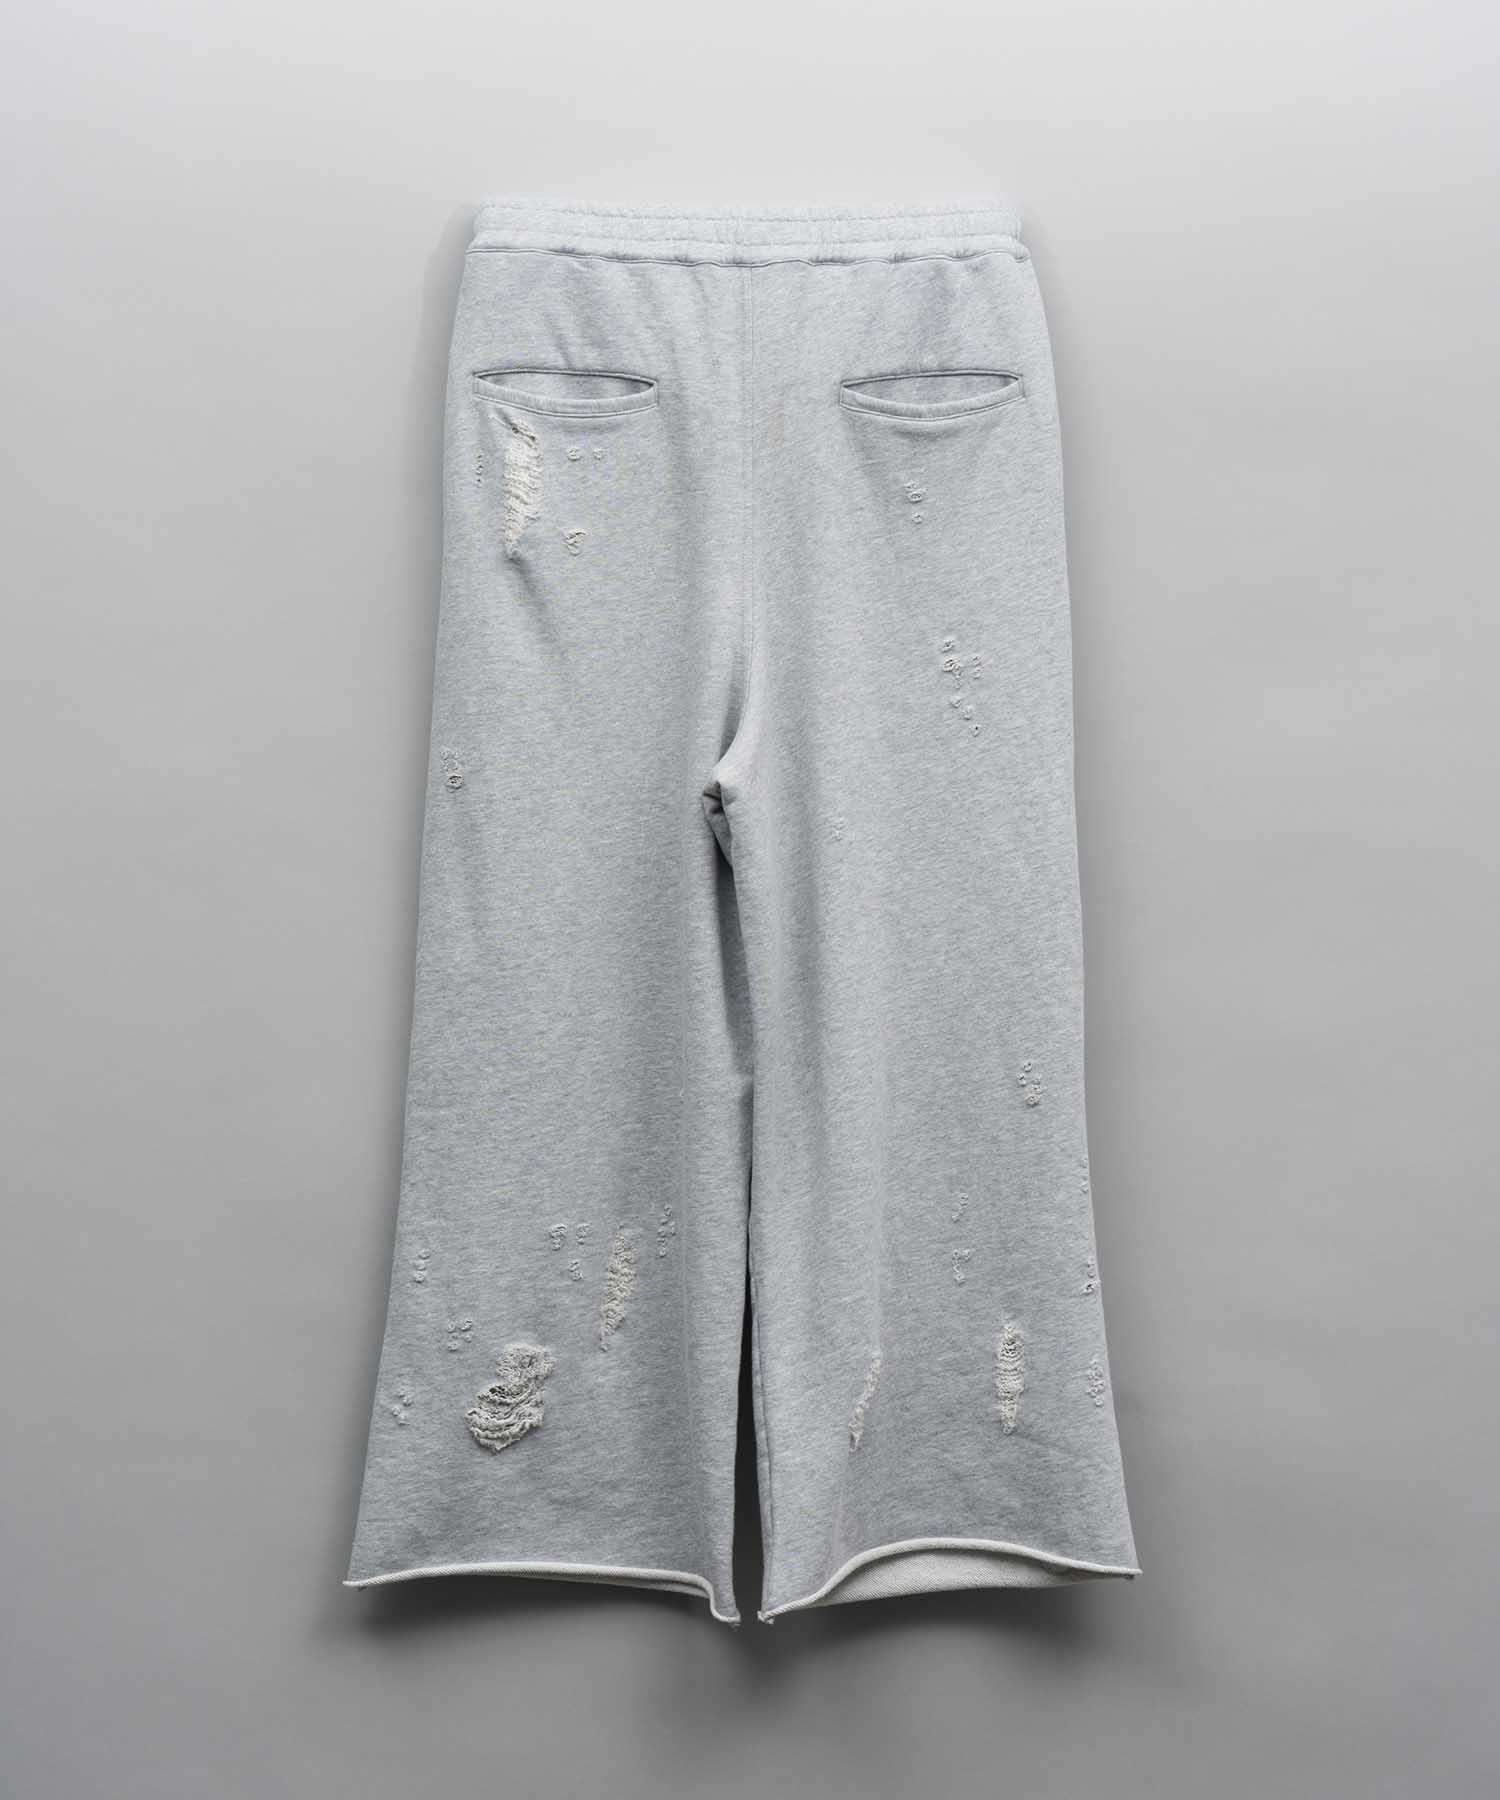 Heavy-Weight Sweat Buggy Destroy Pants